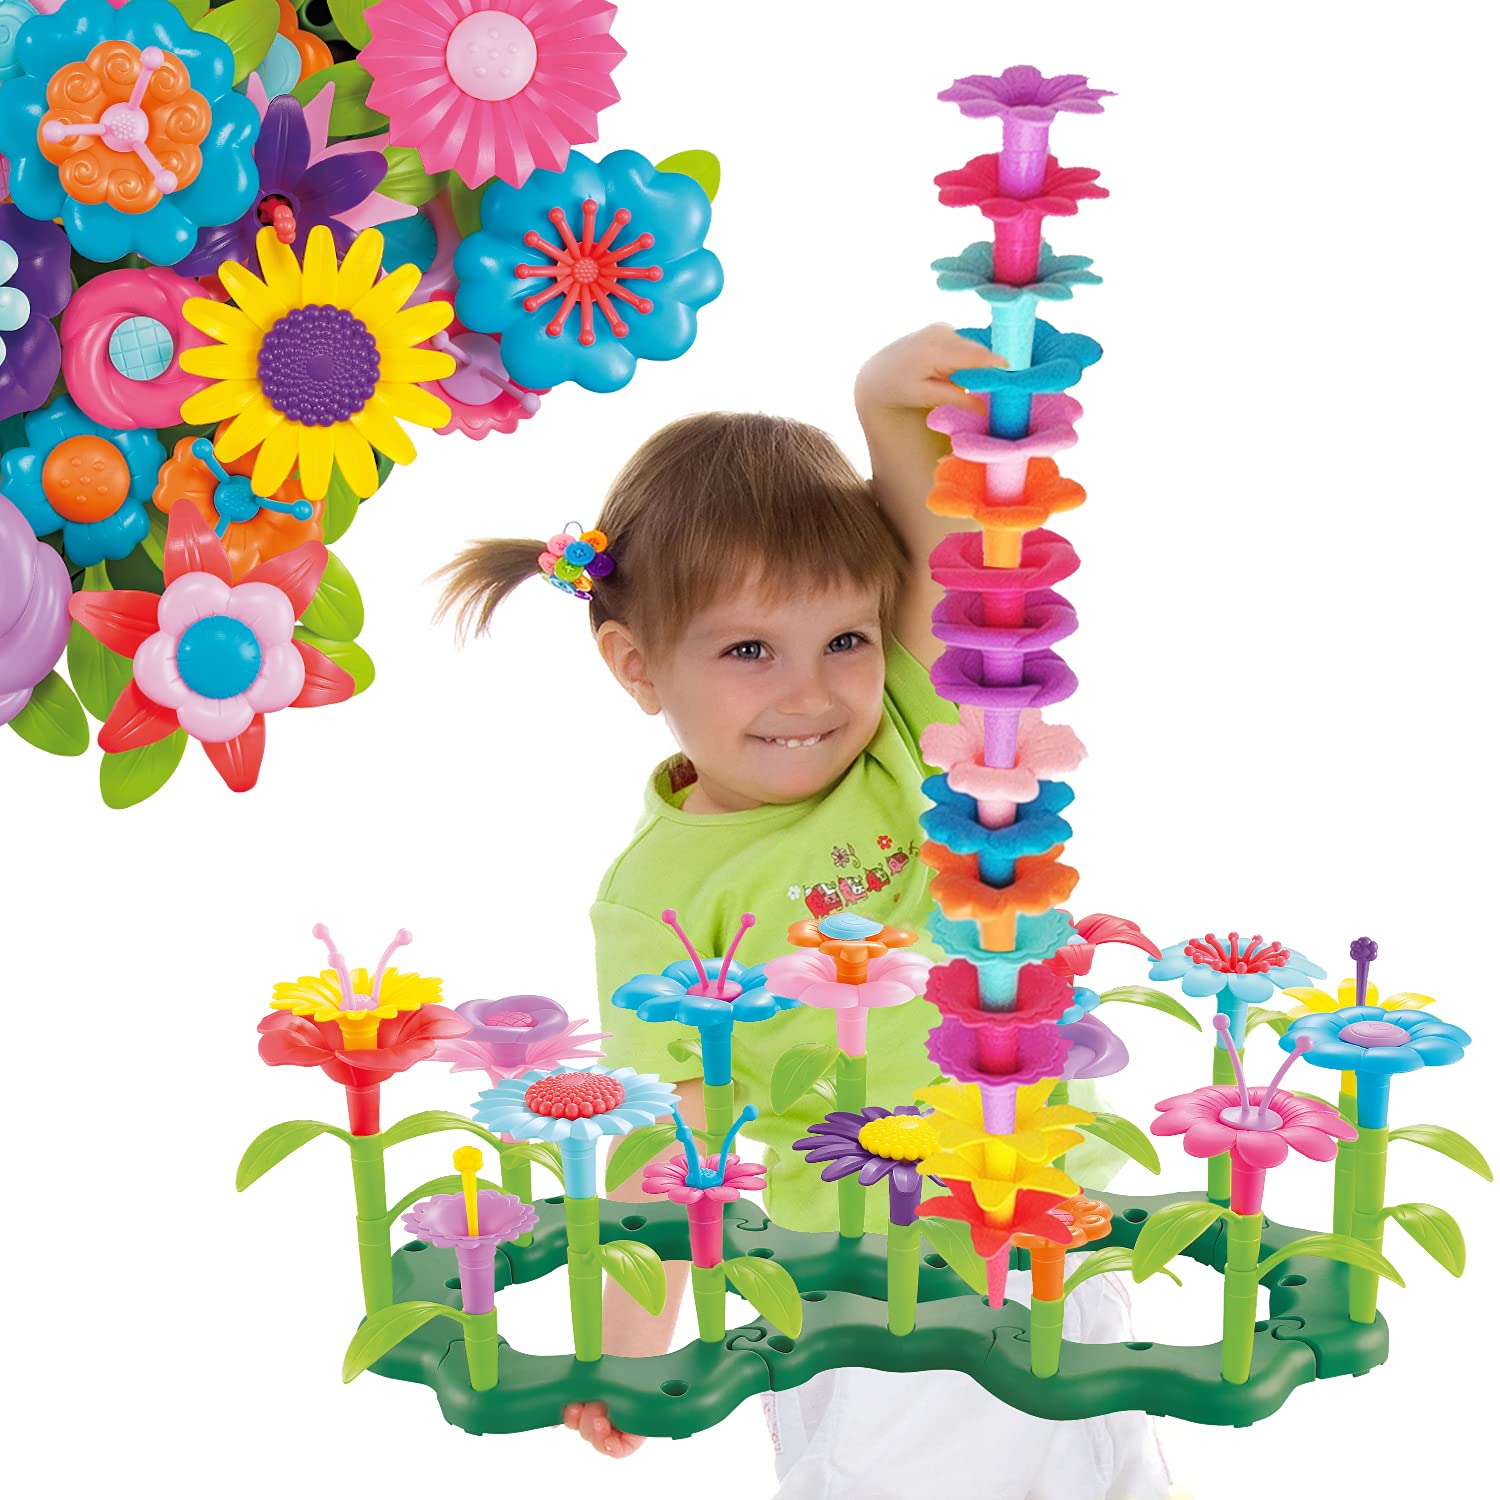 Creating Beautiful Blooms: The Perfect Toy for Building Your Own Flower Garden